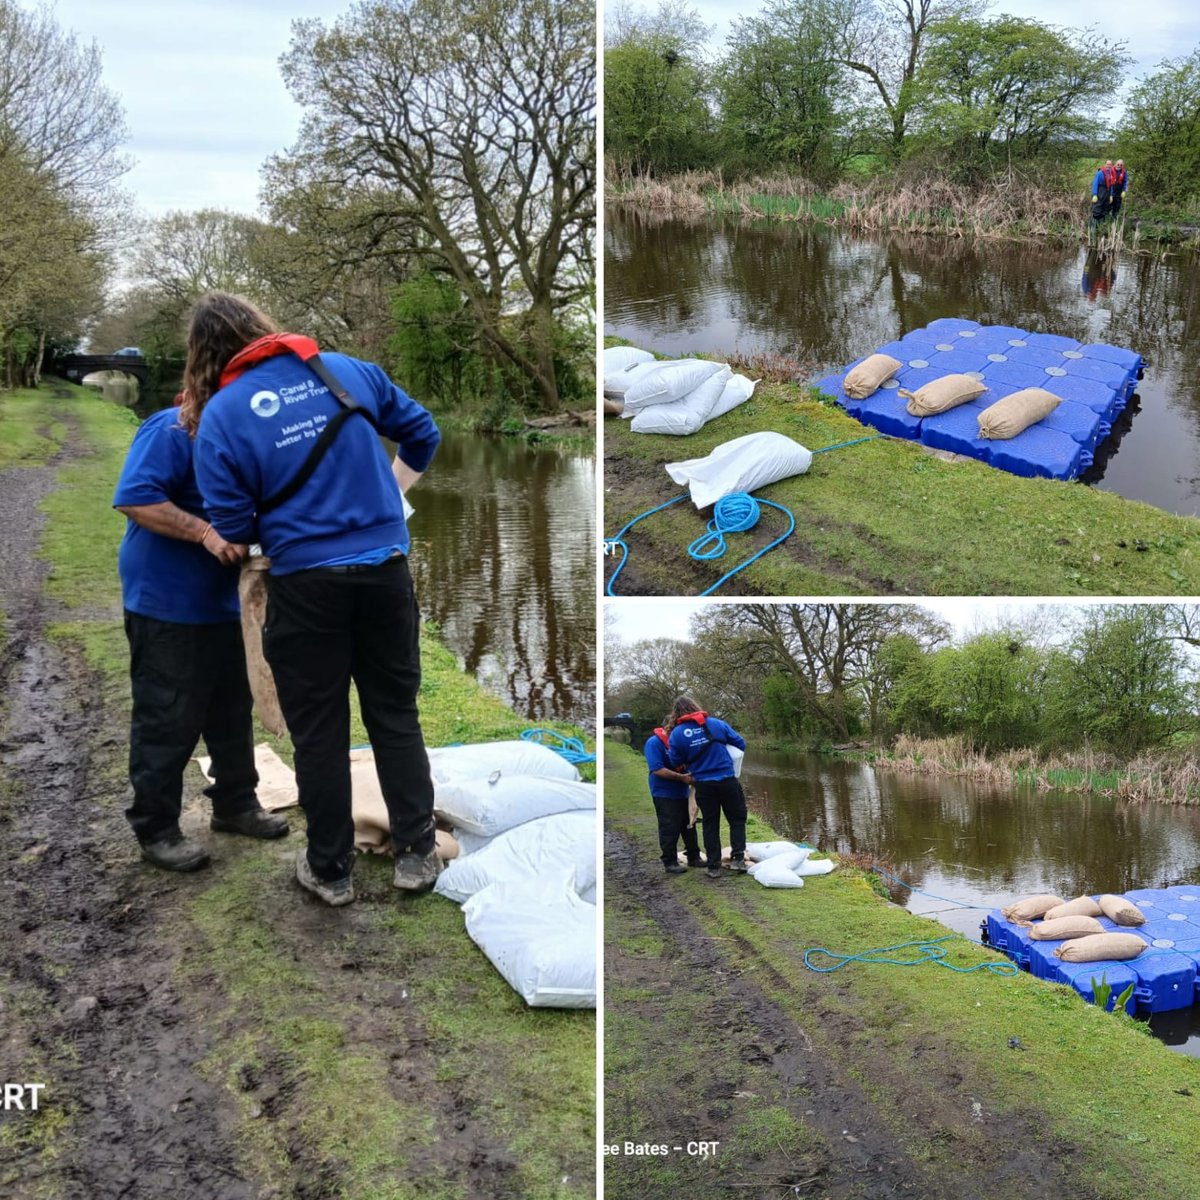 The local operations team are out this morning on the #CannockExtension canal undertaking some emergency bank protection to prevent a breach of the embankment. @CRTWestMidlands @CRTBoating #Emergency #bankprotection #localcanal